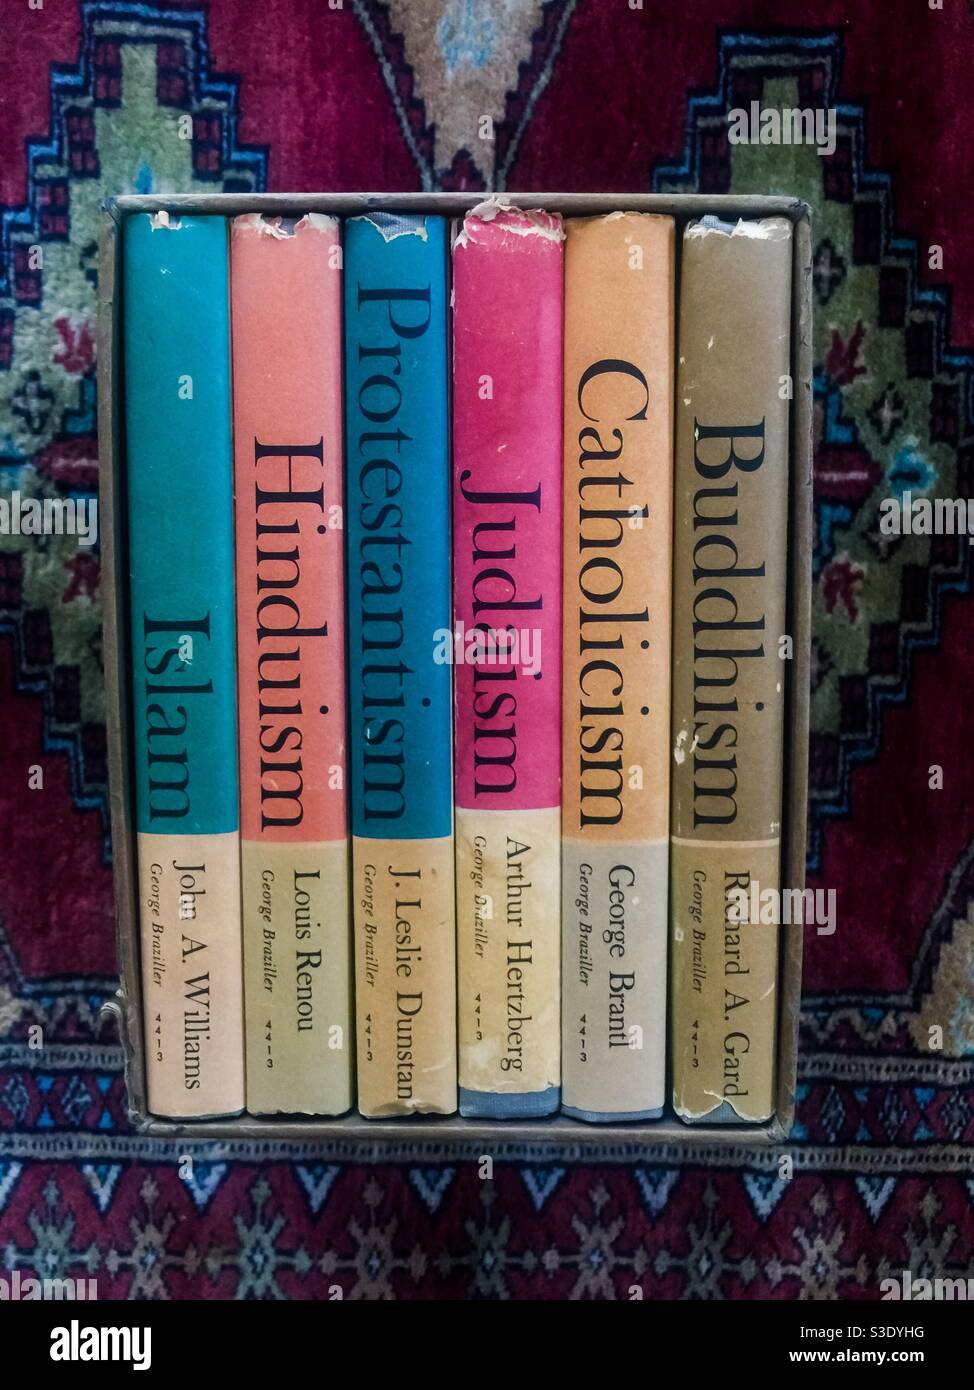 Major religions in one box set. Six books, on Hinduism, Islam, Buddhism, Catholicism, Judaism, and Protestantism. Concept of harmony, syncretism, faith, coexistence, peace, diversity, unity. Stock Photo